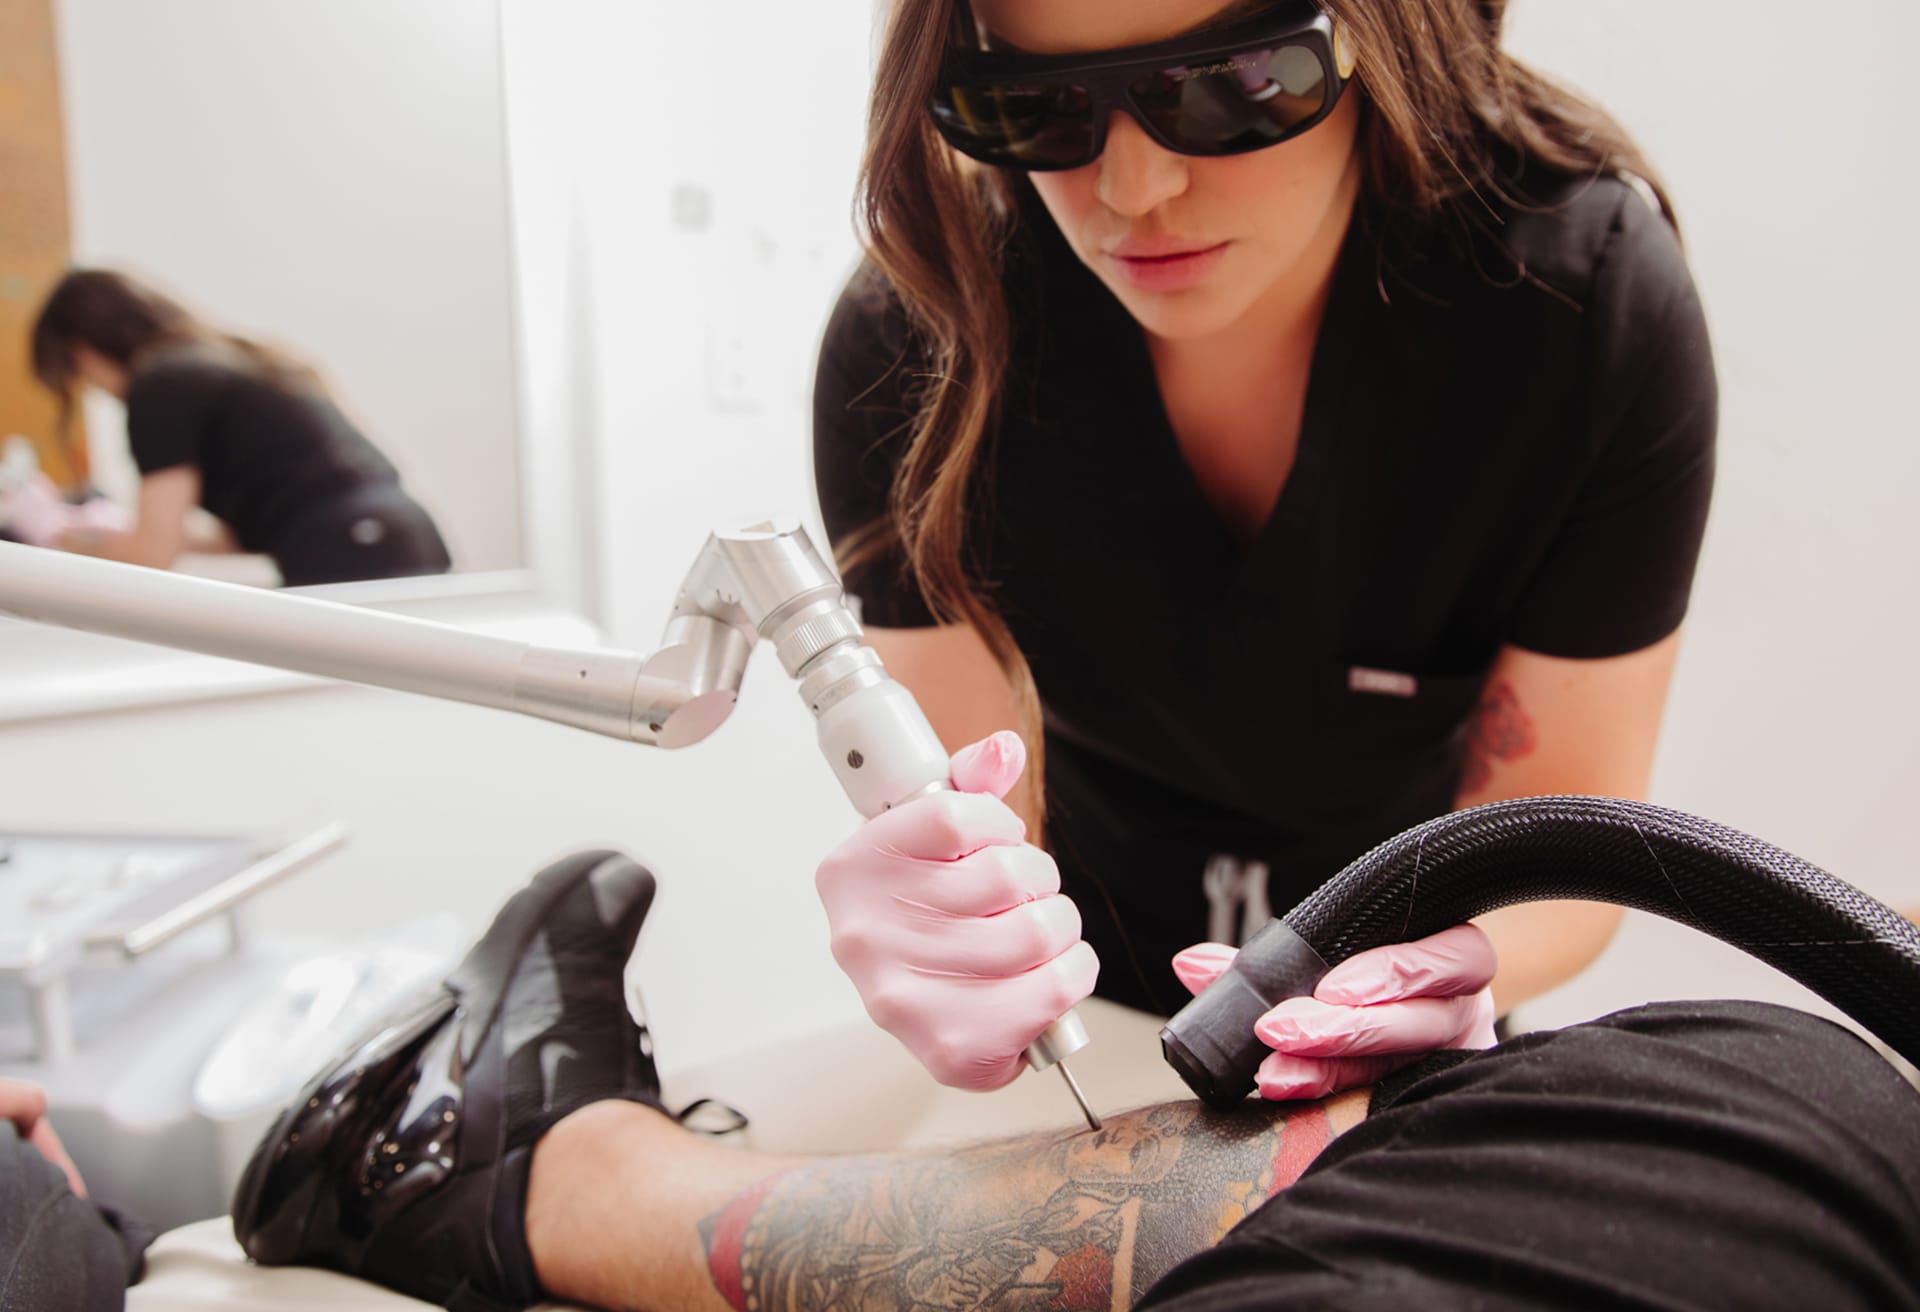 Tattoo Removal Pricing From 150  NEW 197 FLAT FEE 